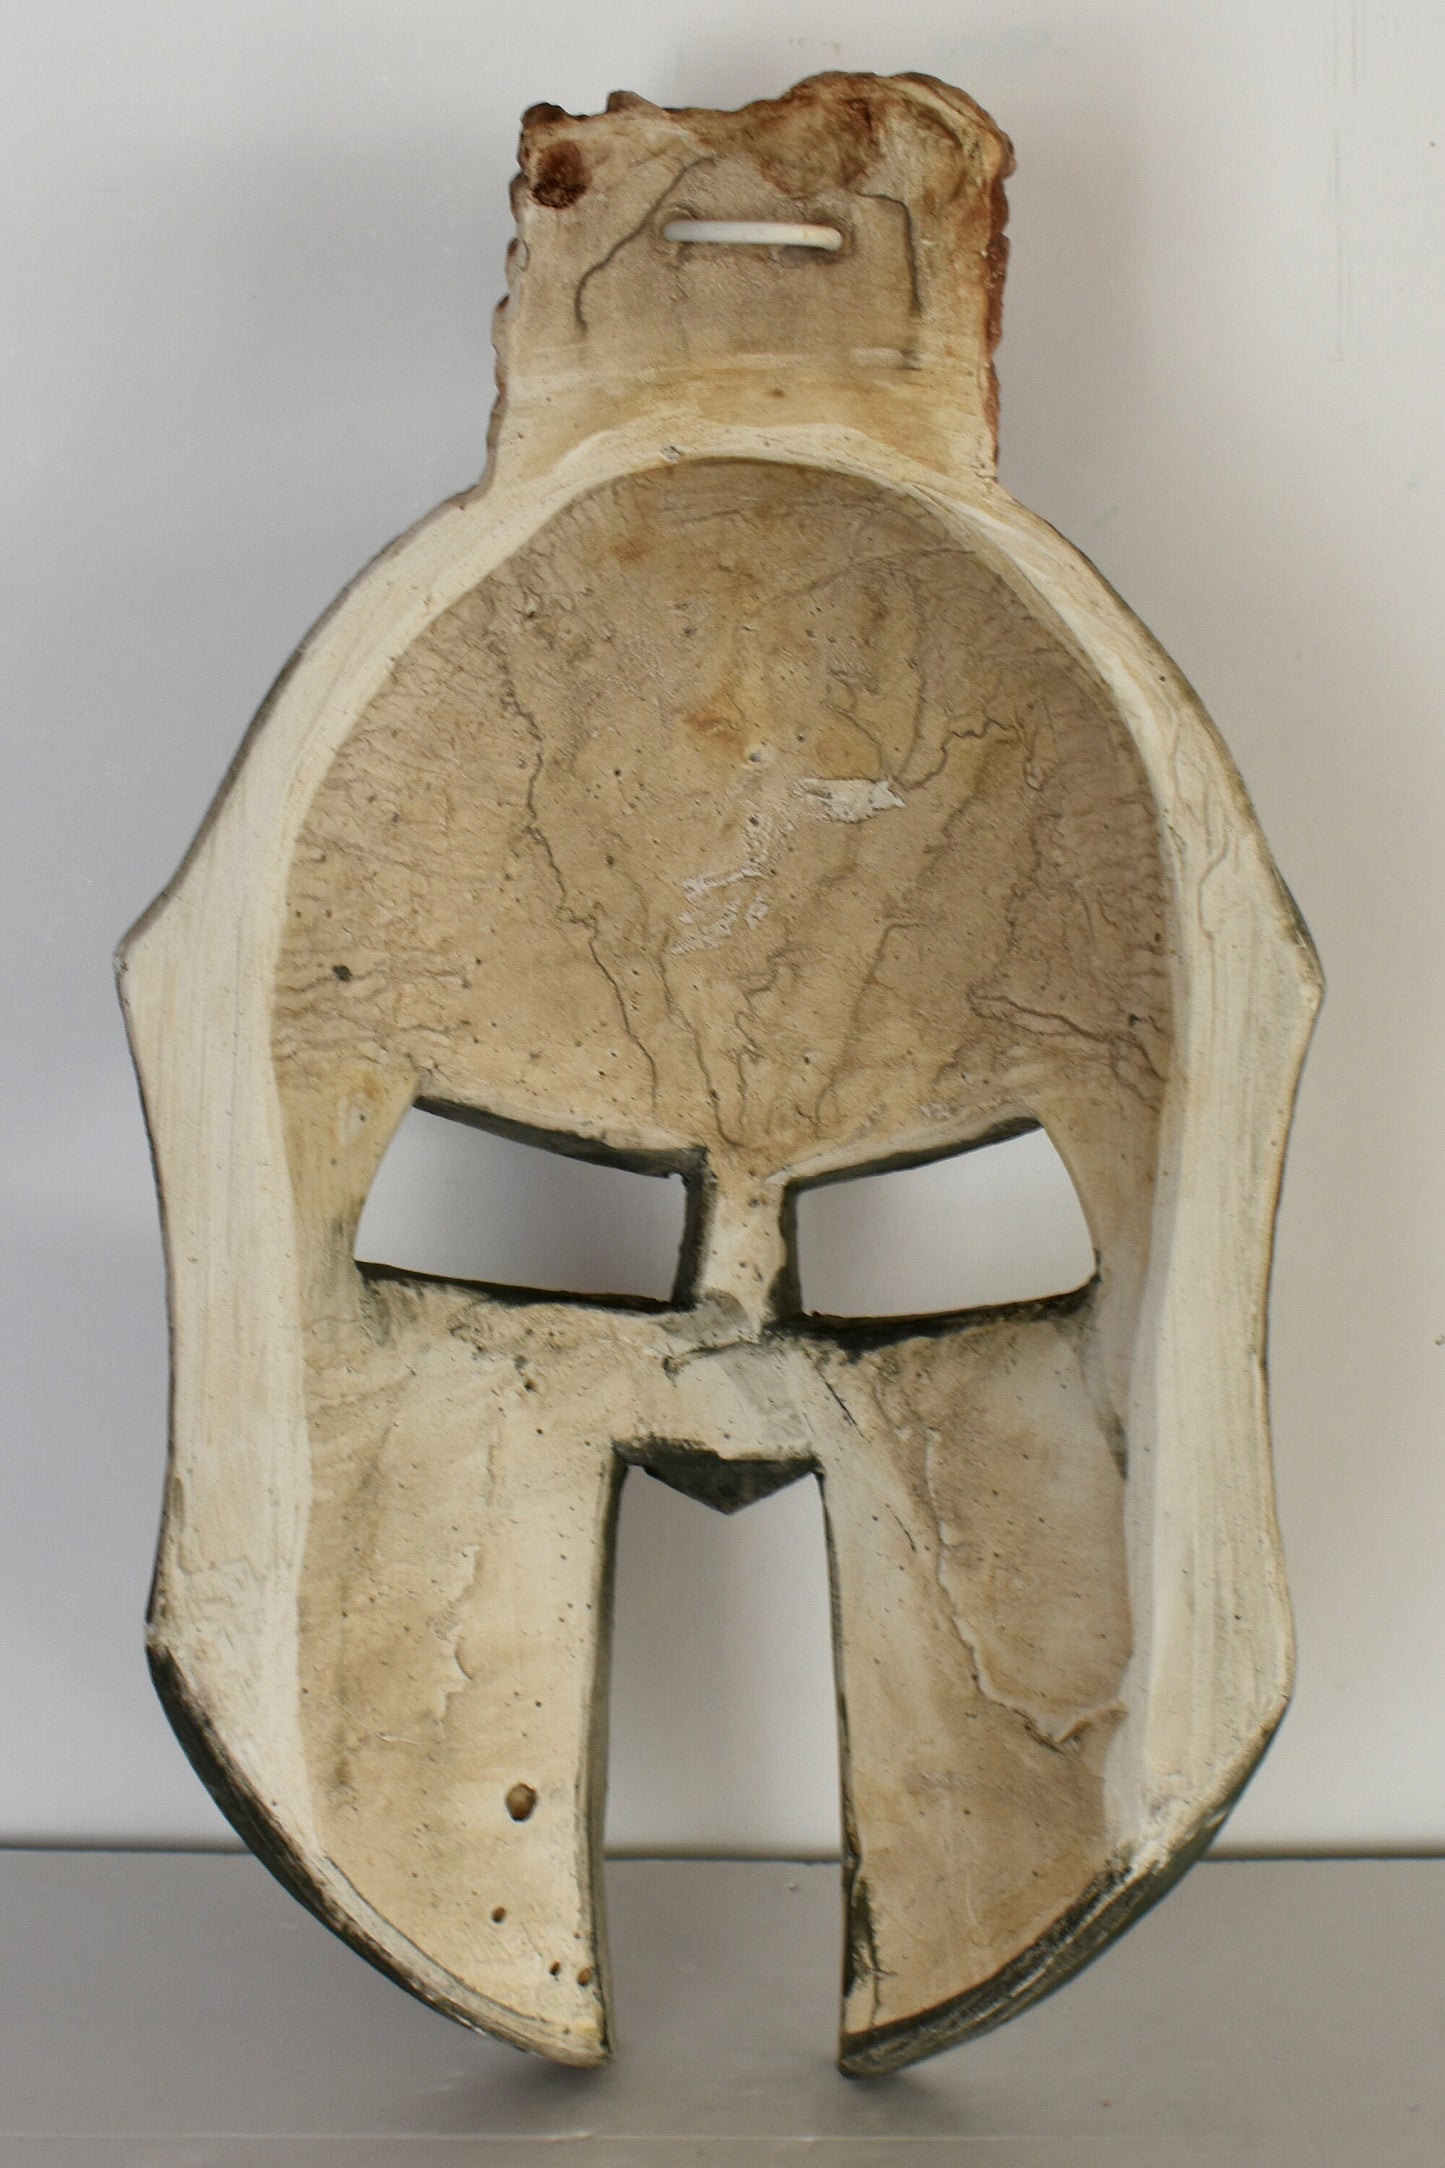 Leonidas Mask - Spartan King - Leader of 300 - Battle of Thermopylae - 480 BC - Molon Labe, Come and Take Them - Wall Decoration